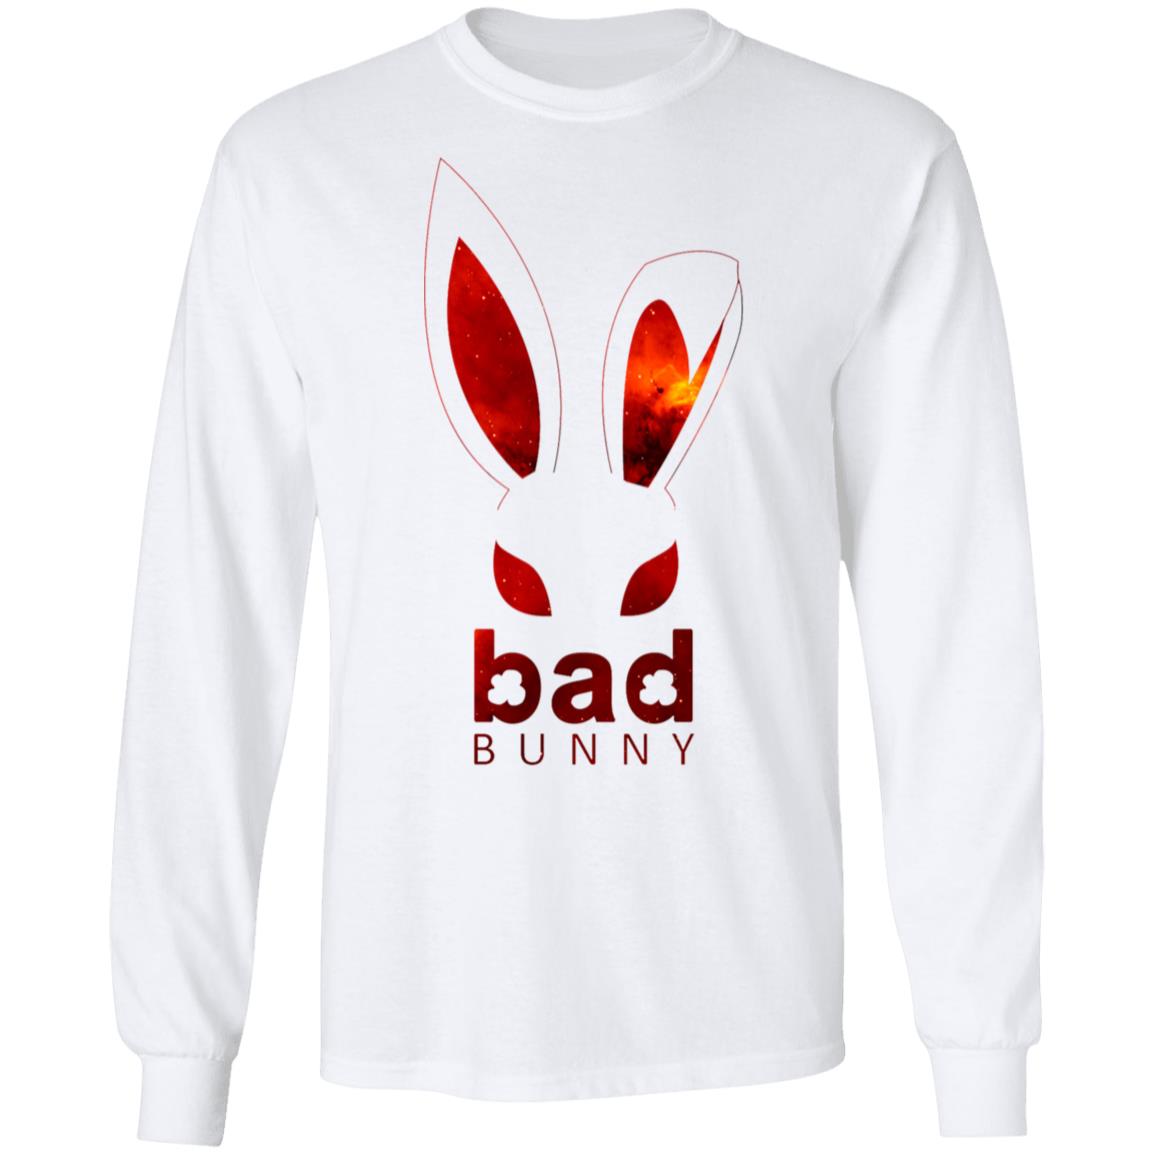 Must-have clothing for Bad Bunny fans: super cool shirt recommendations插图